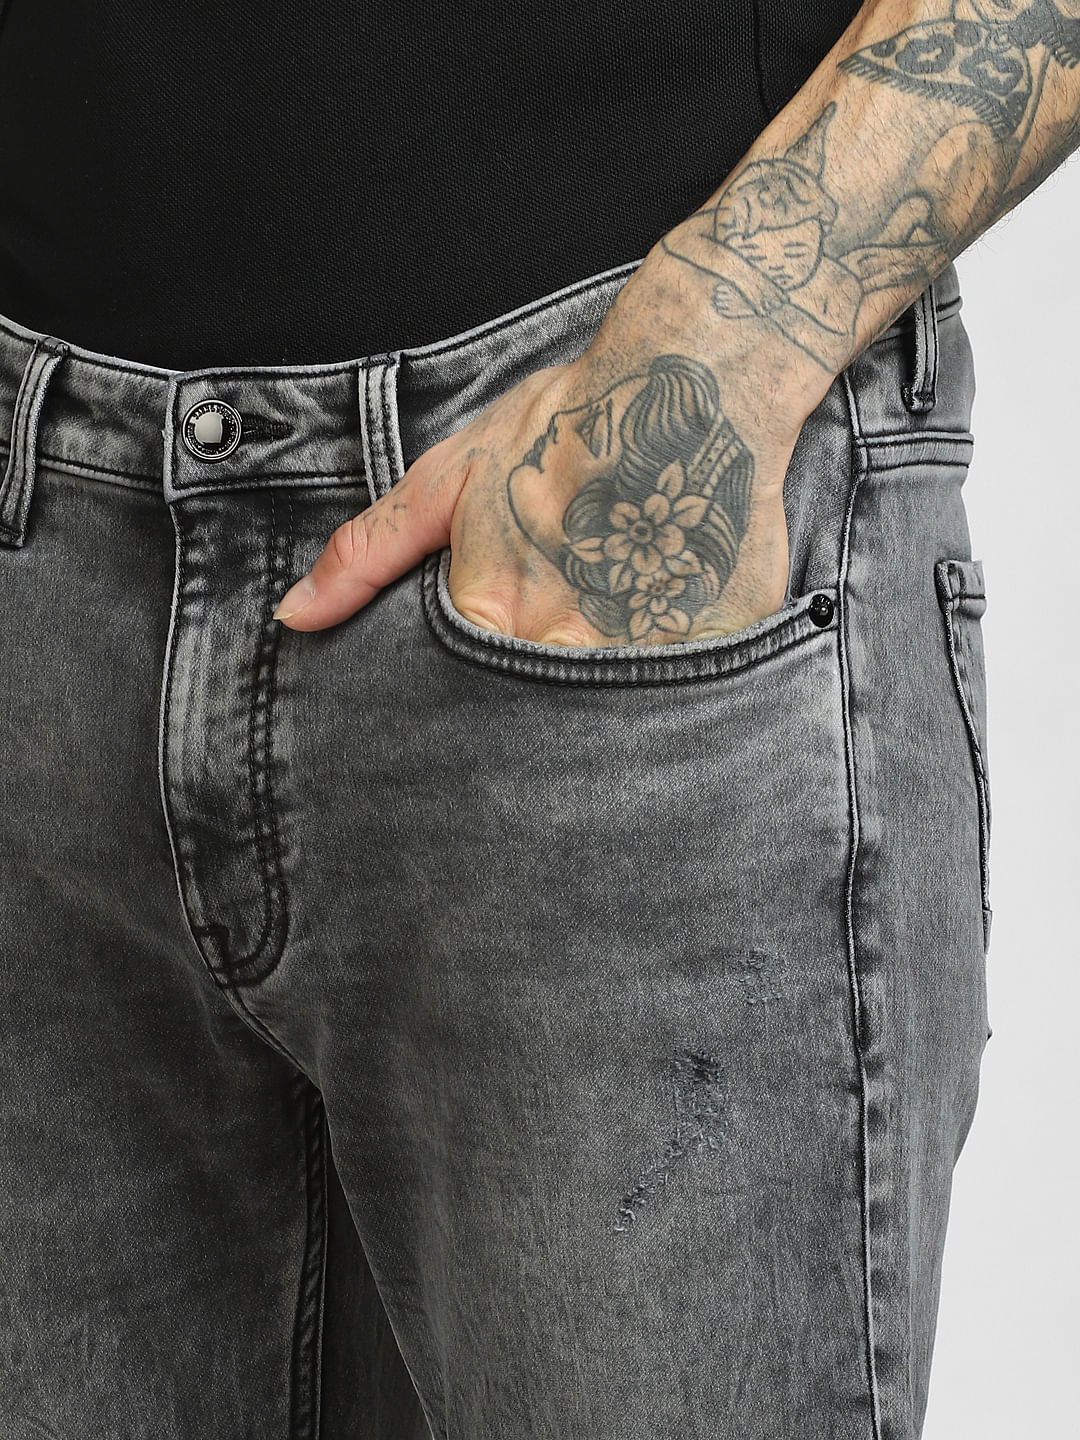 Tattoos Archives | Pleated Jeans